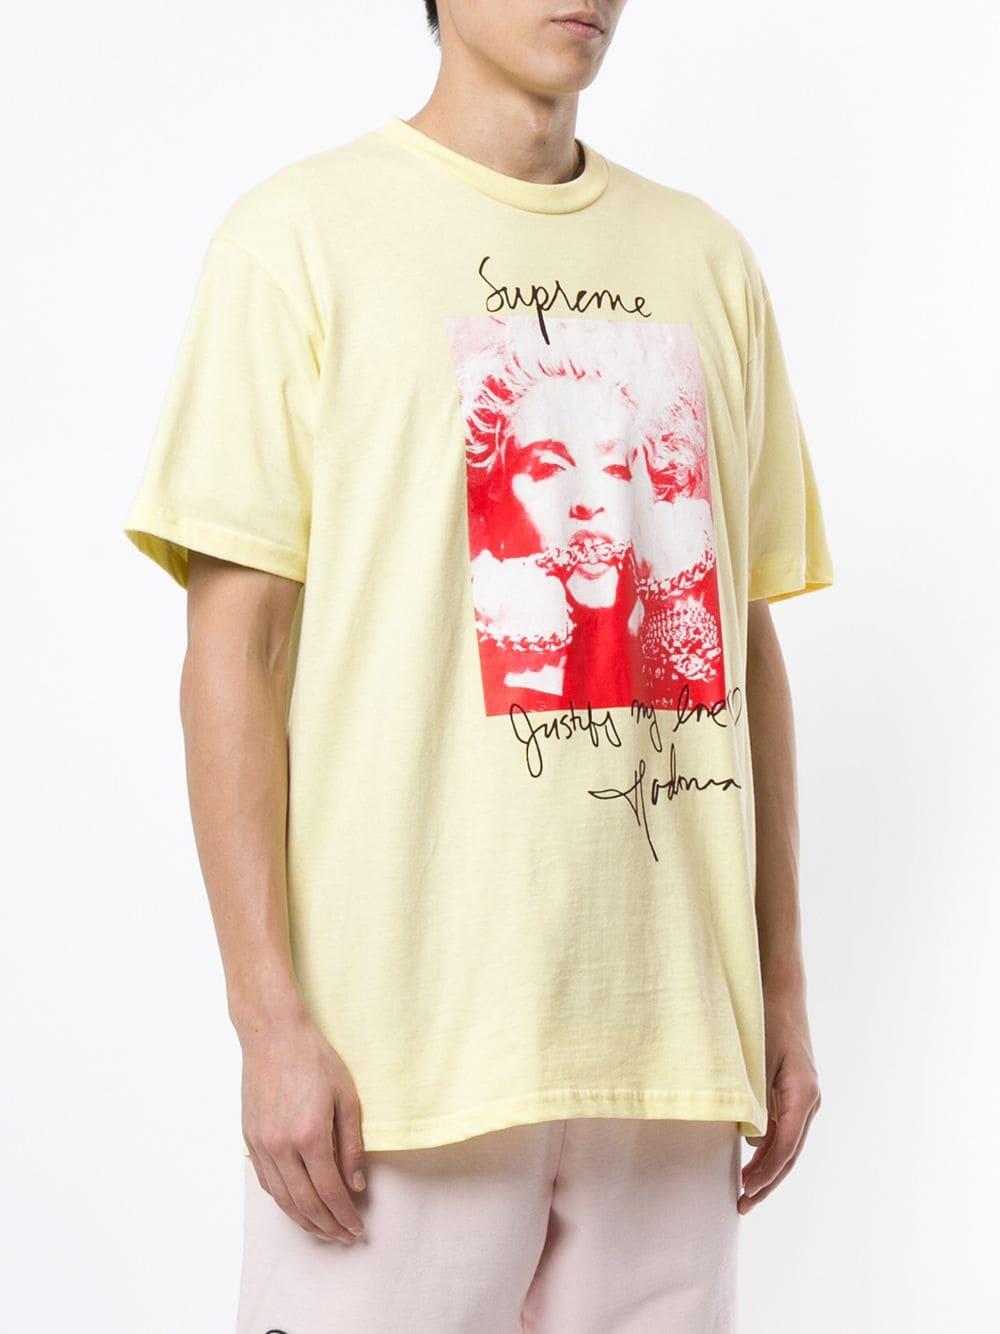 Supreme Cotton Madonna Tee in Yellow for Men - Lyst